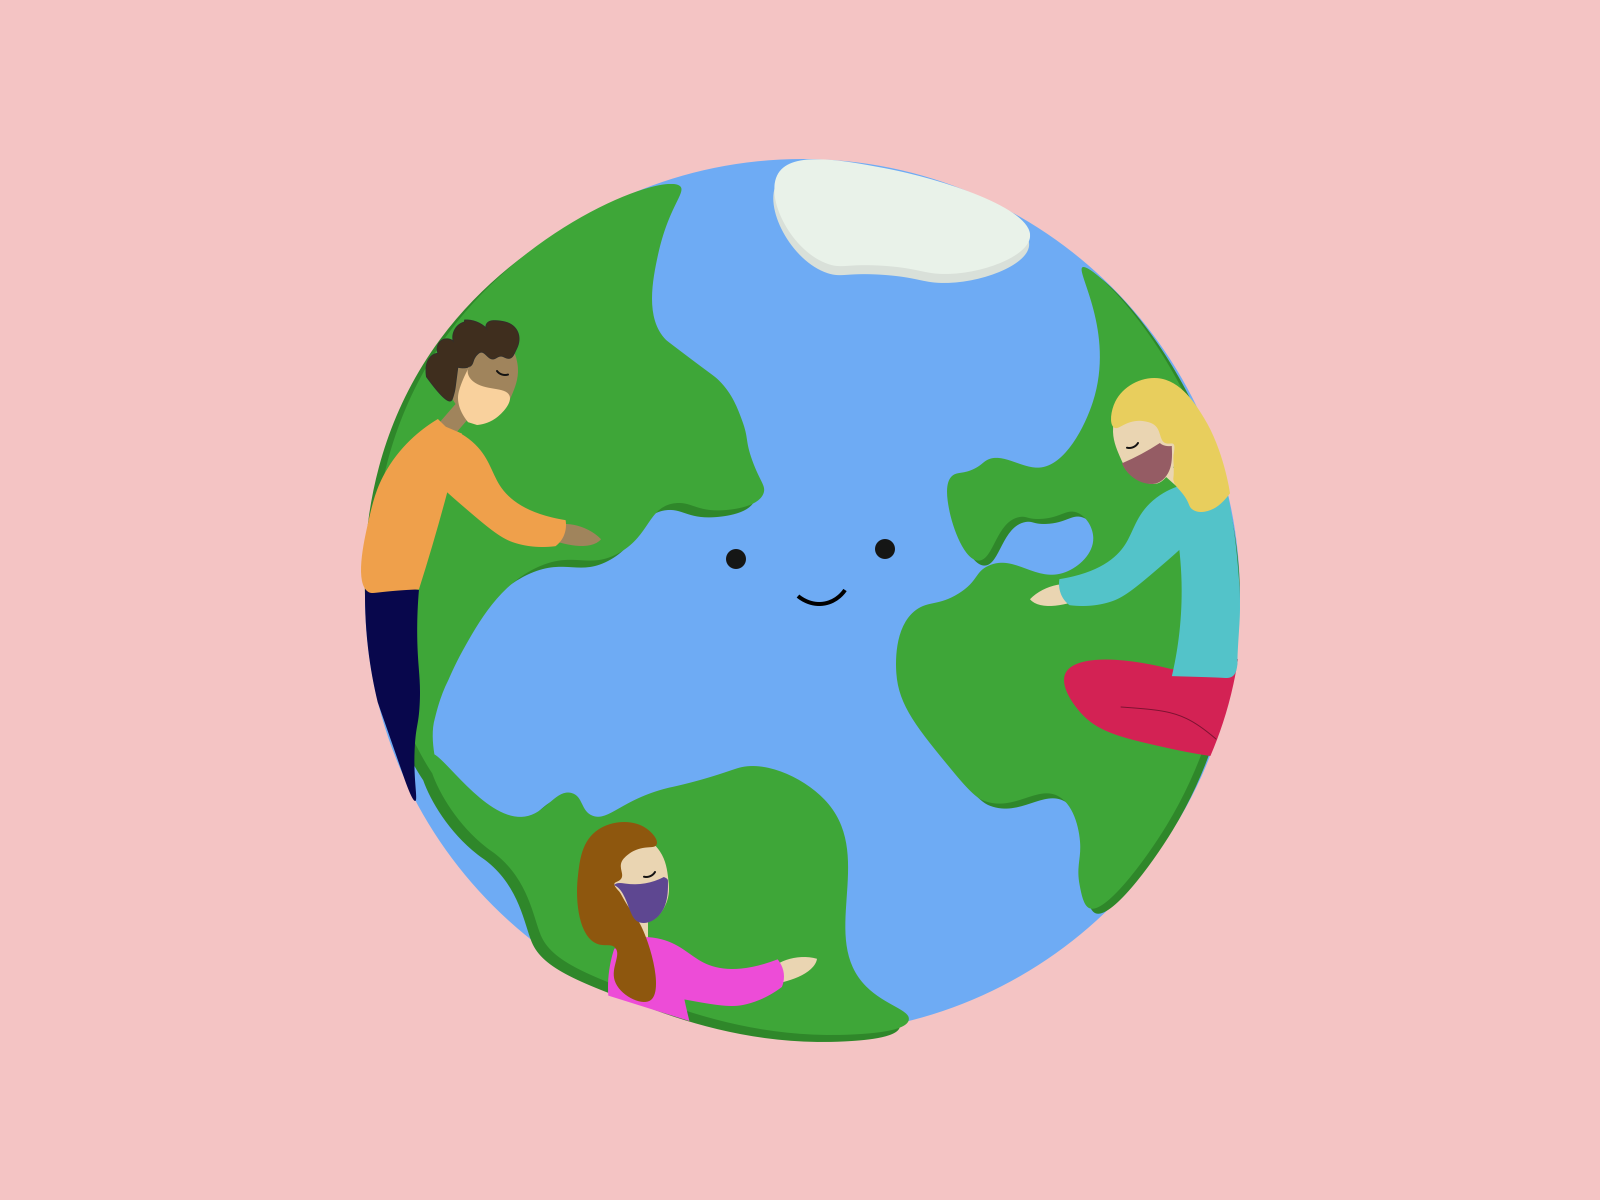 Happy Earth day by Lilibeth Bustos Linares on Dribbble